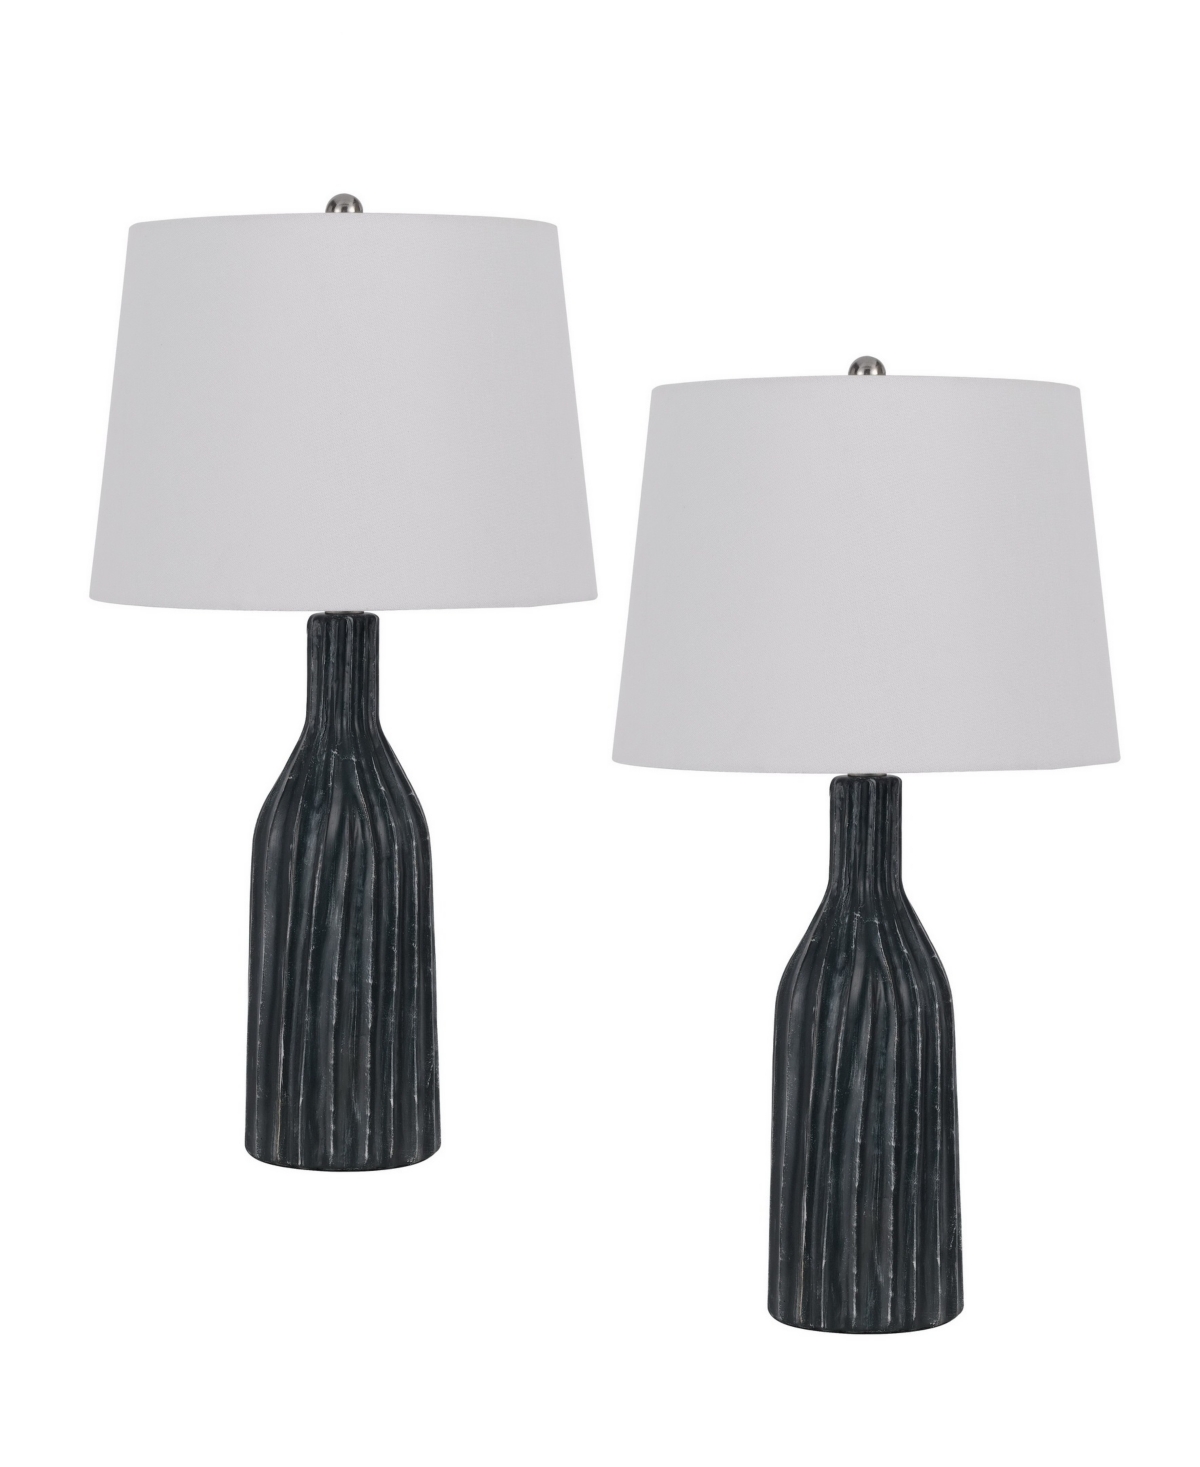 Cal Lighting 24.5" Height Ceramic Table Lamp Set In Marble